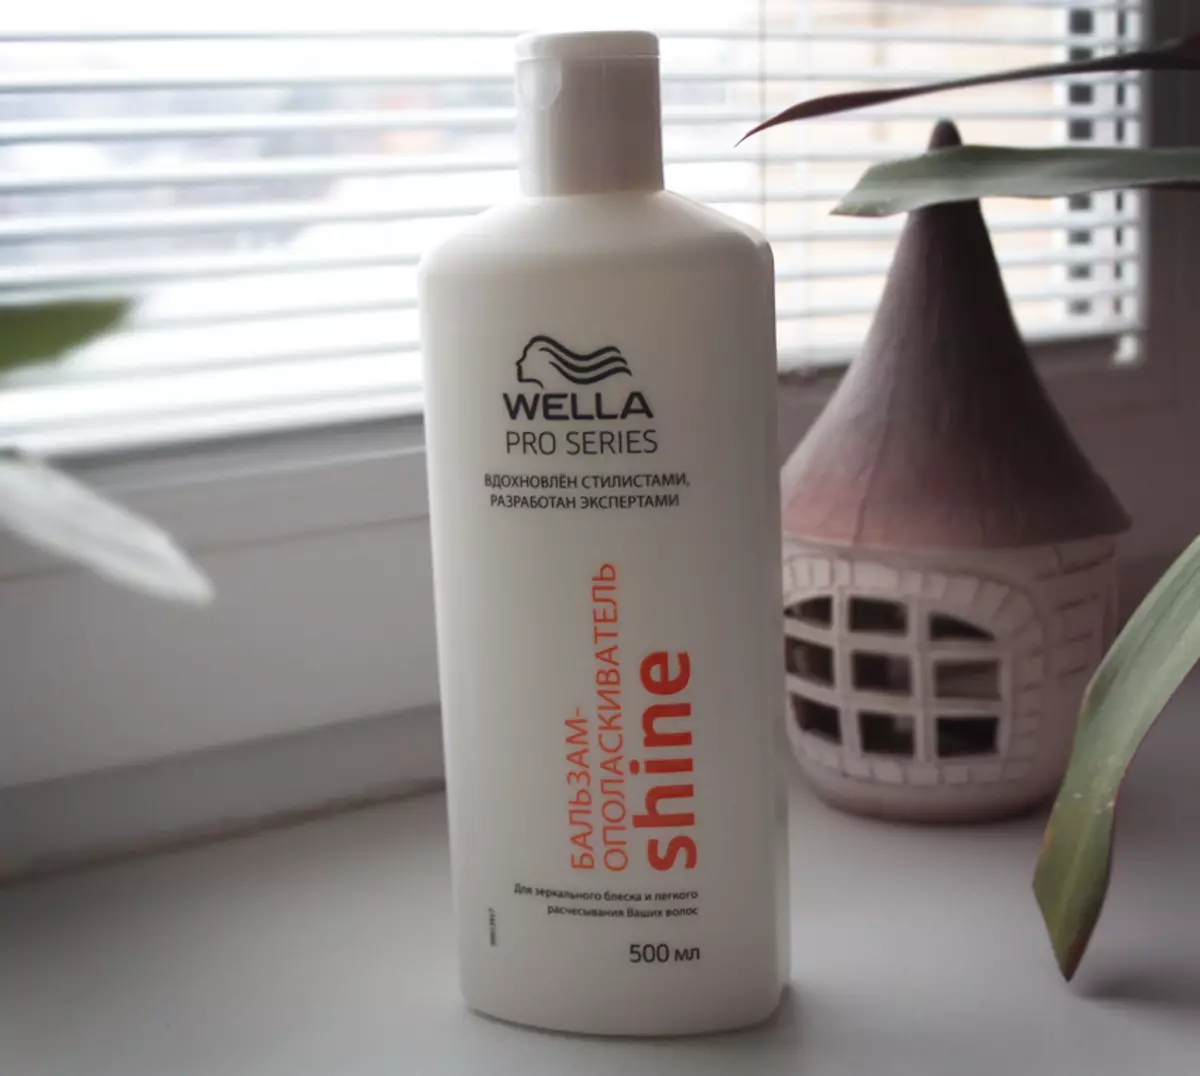 Wella Professional: Professional Hair Cosmetics Review, Pros and Cons 4770_11